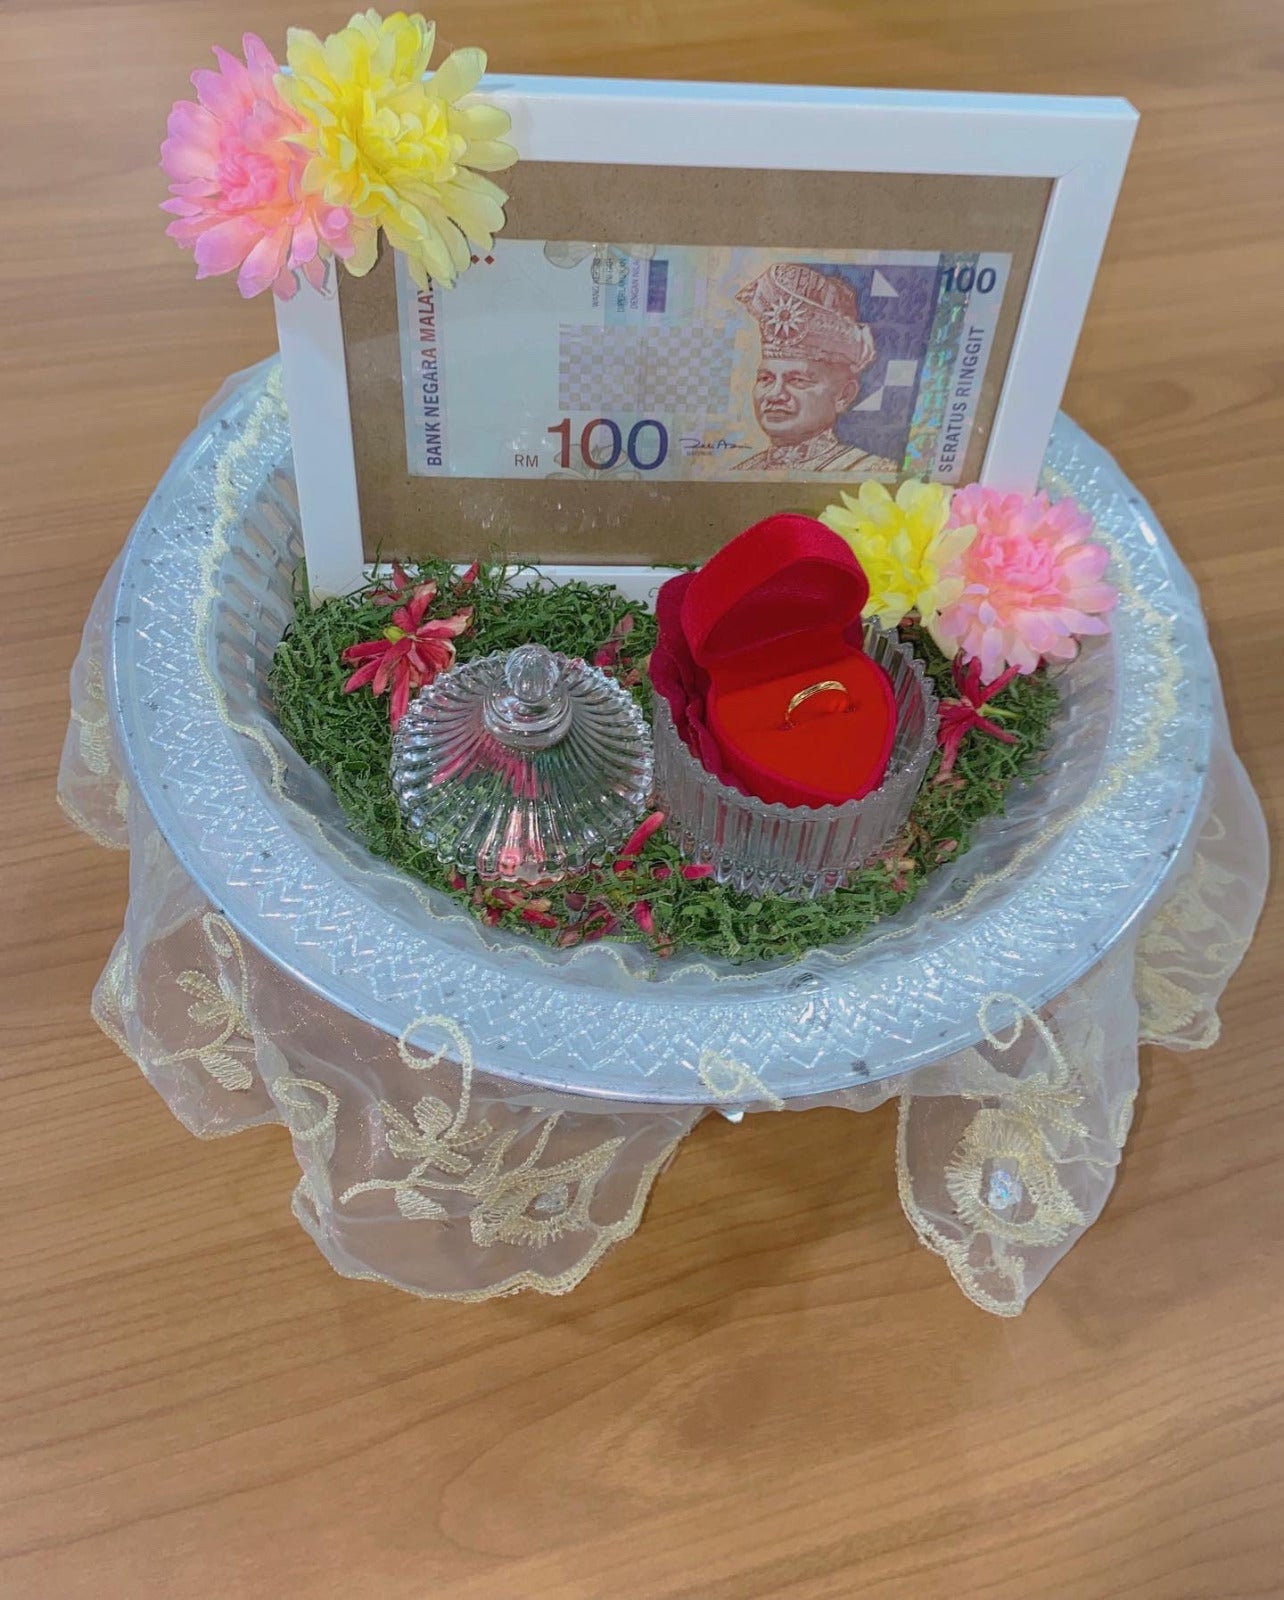 malay couple use rm1000 for simple wedding 2 1 scaled